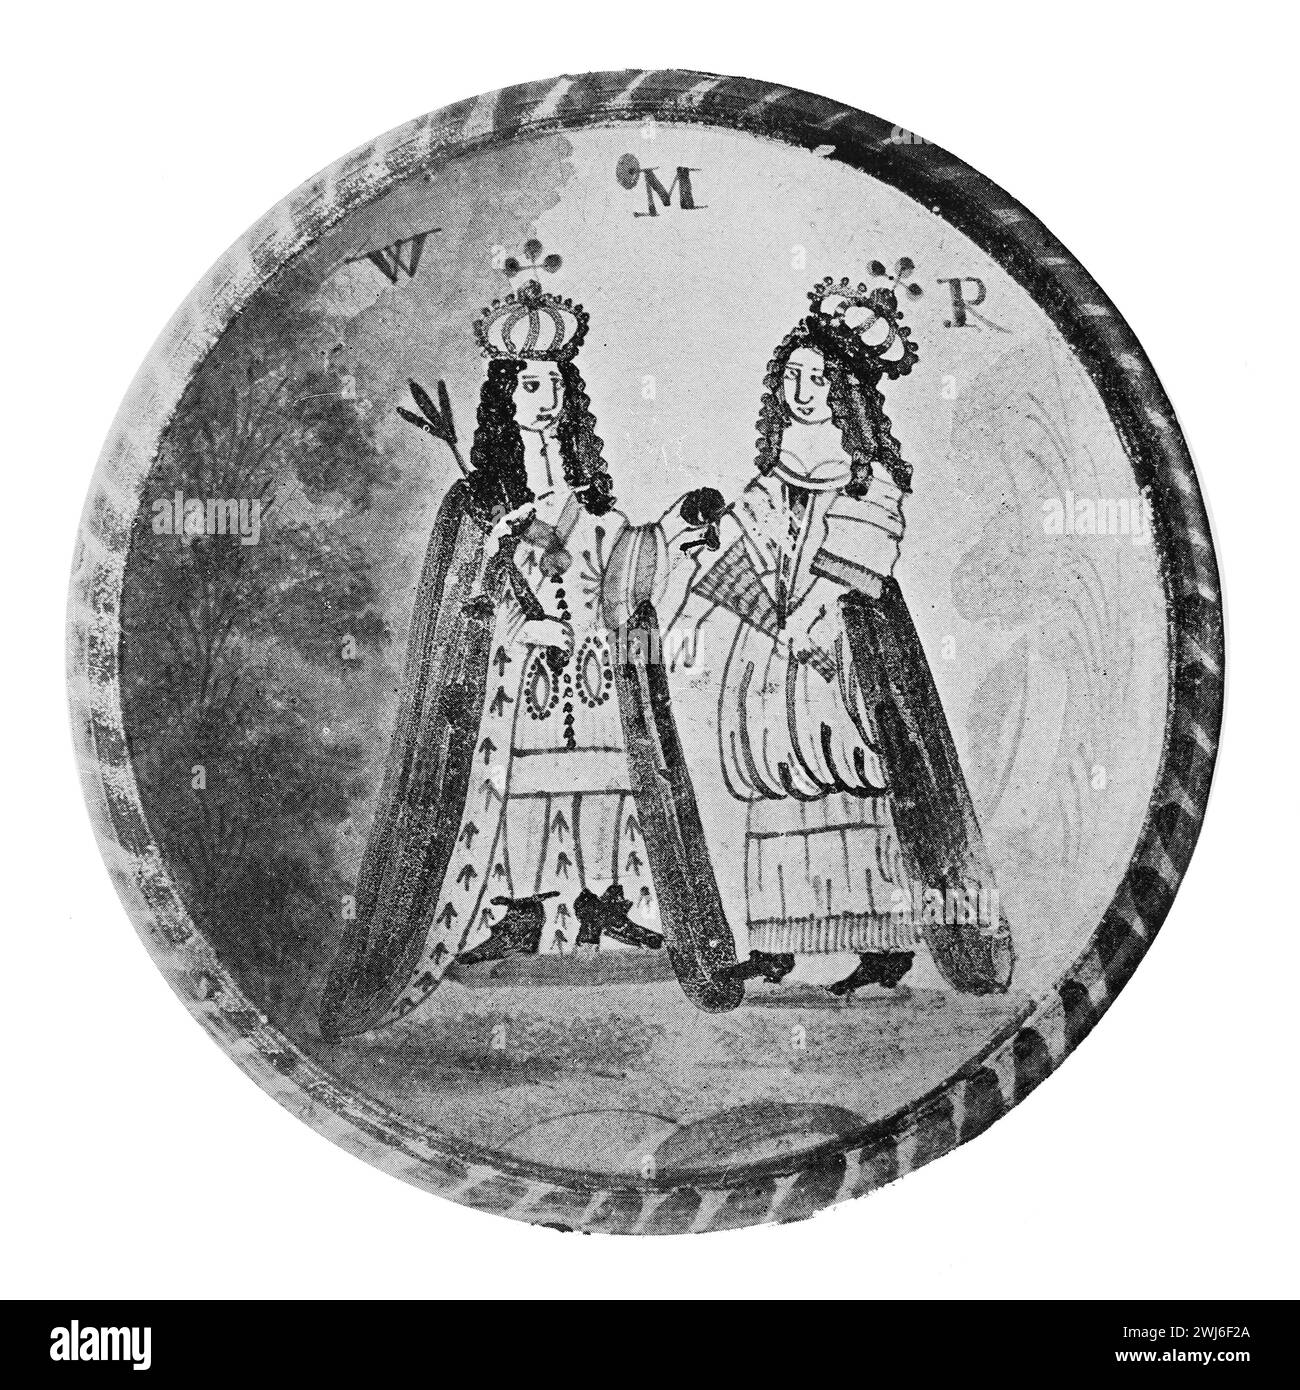 An old English Delft plate with a painting of William III of England and Queen Mary. 17th century. Black and White Illustration from the Connoisseur, an Illustrated Magazine for Collectors Voll 3 (May-Aug 1902) published in London. Stock Photo